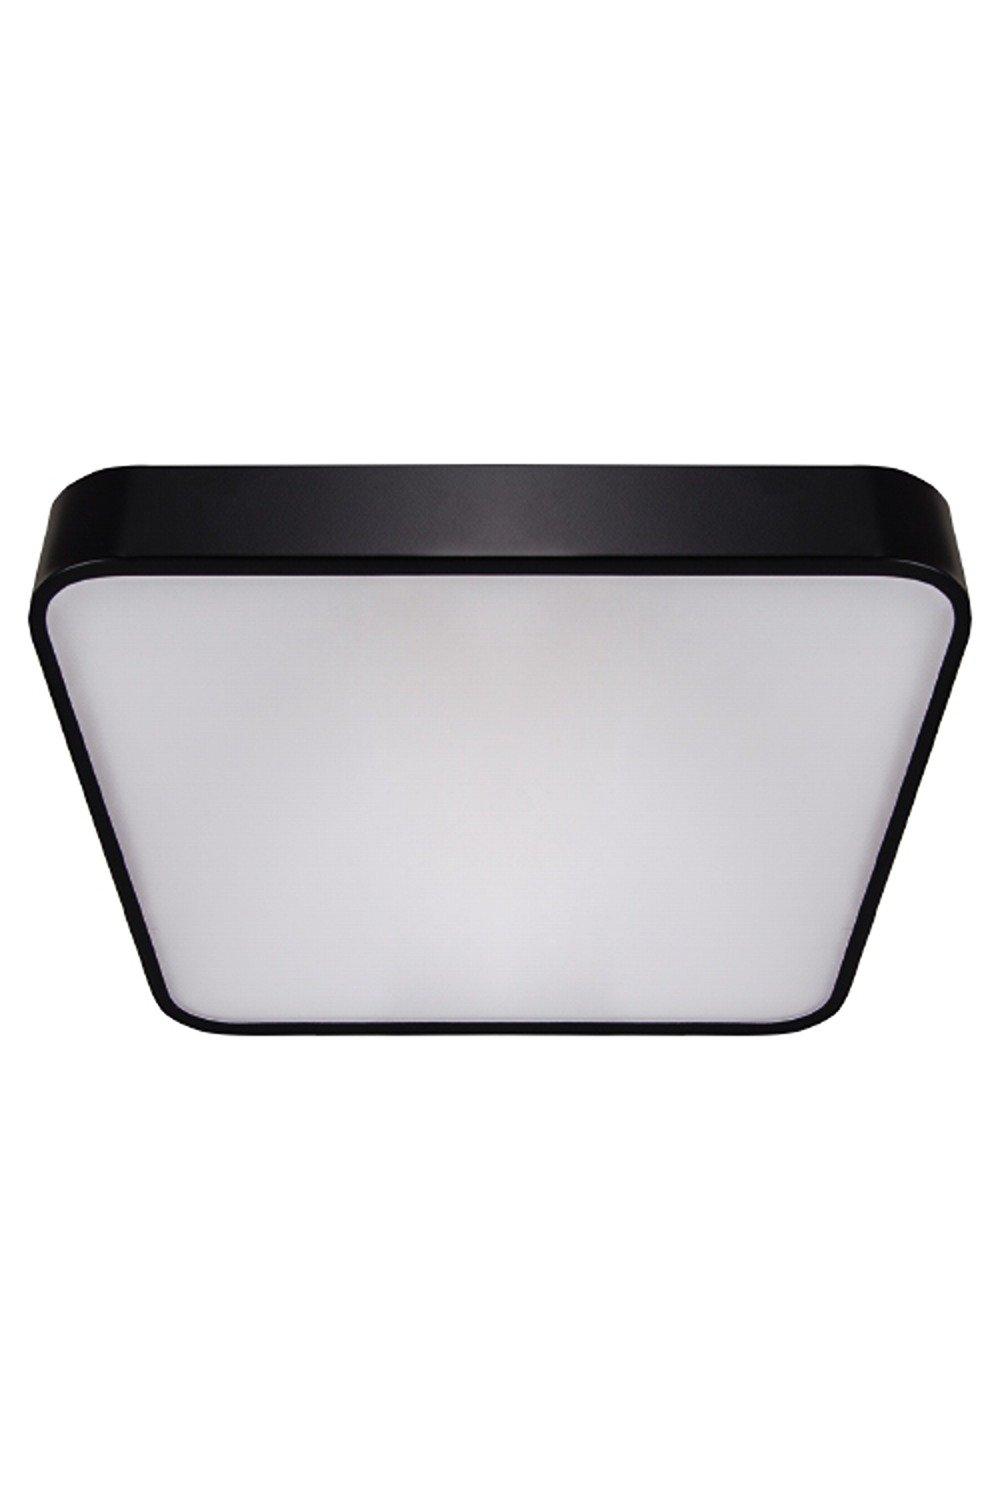 'Luna' Black Round Ceiling Wall Light Surface Mount 48W